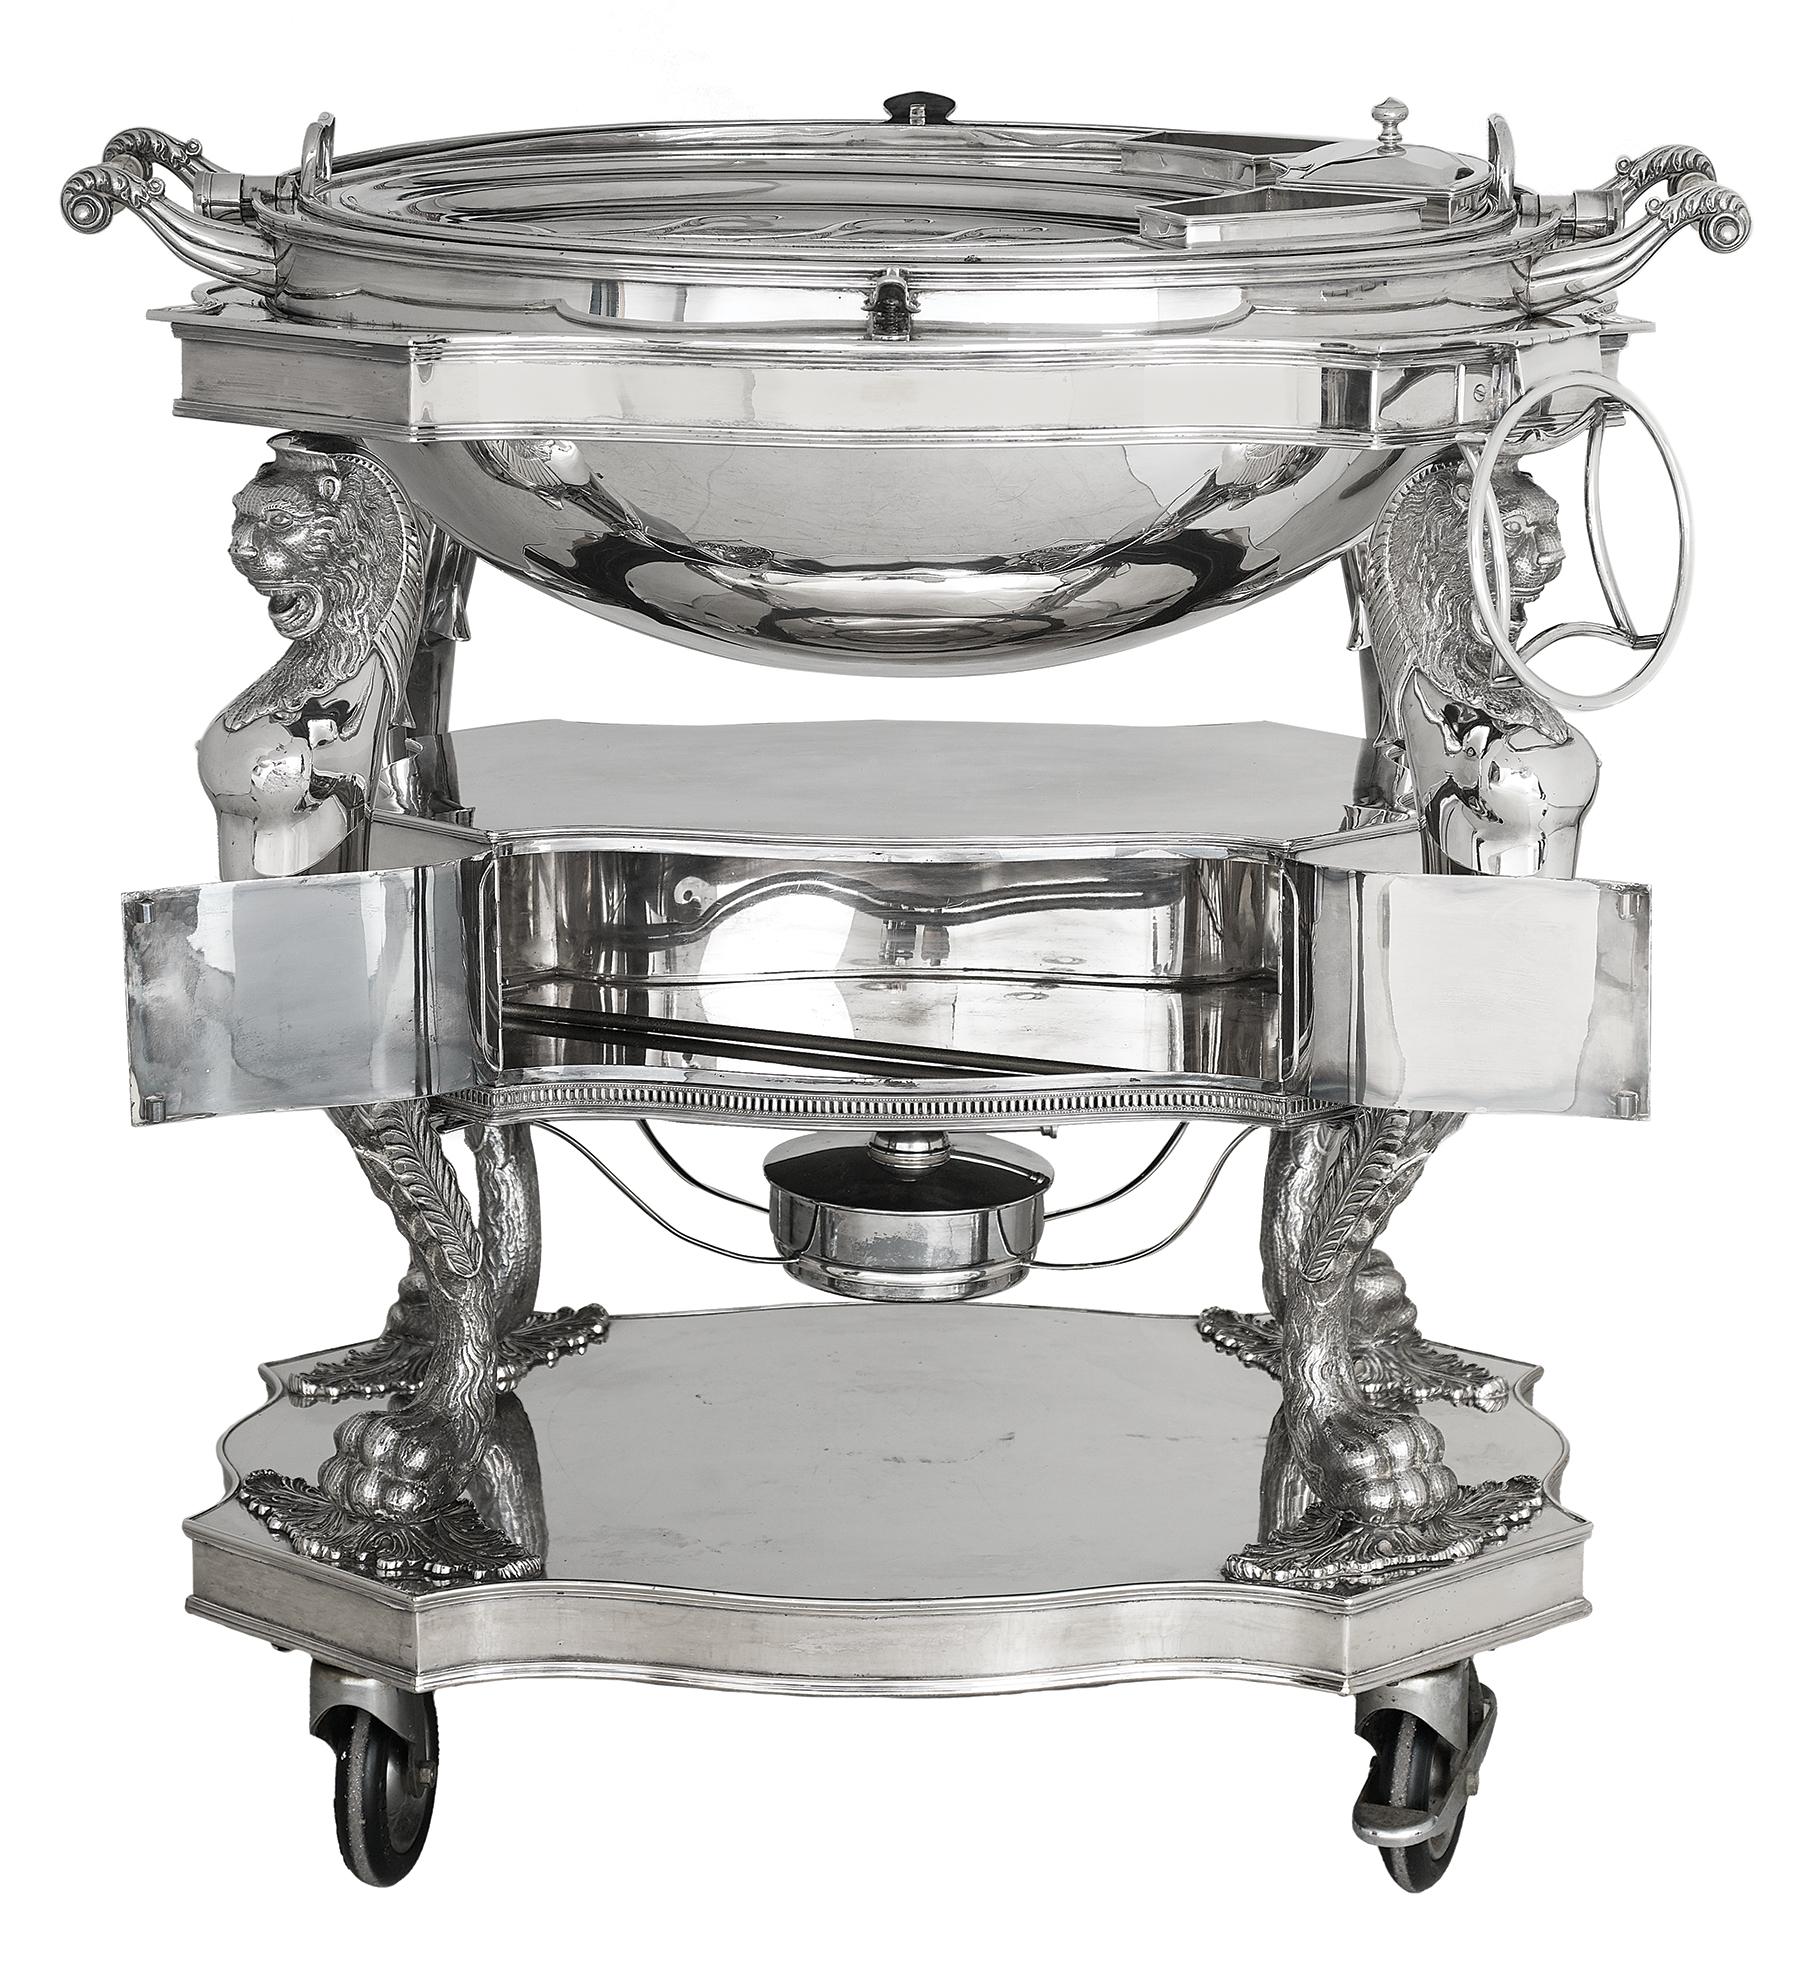 An impressive English silver plate roast beef trolley

We also love using this great entertaining piece for charcuterie , cheeses, desserts or just about anything that requires a tray. A gorgeous centerpiece for any room. This was made in the